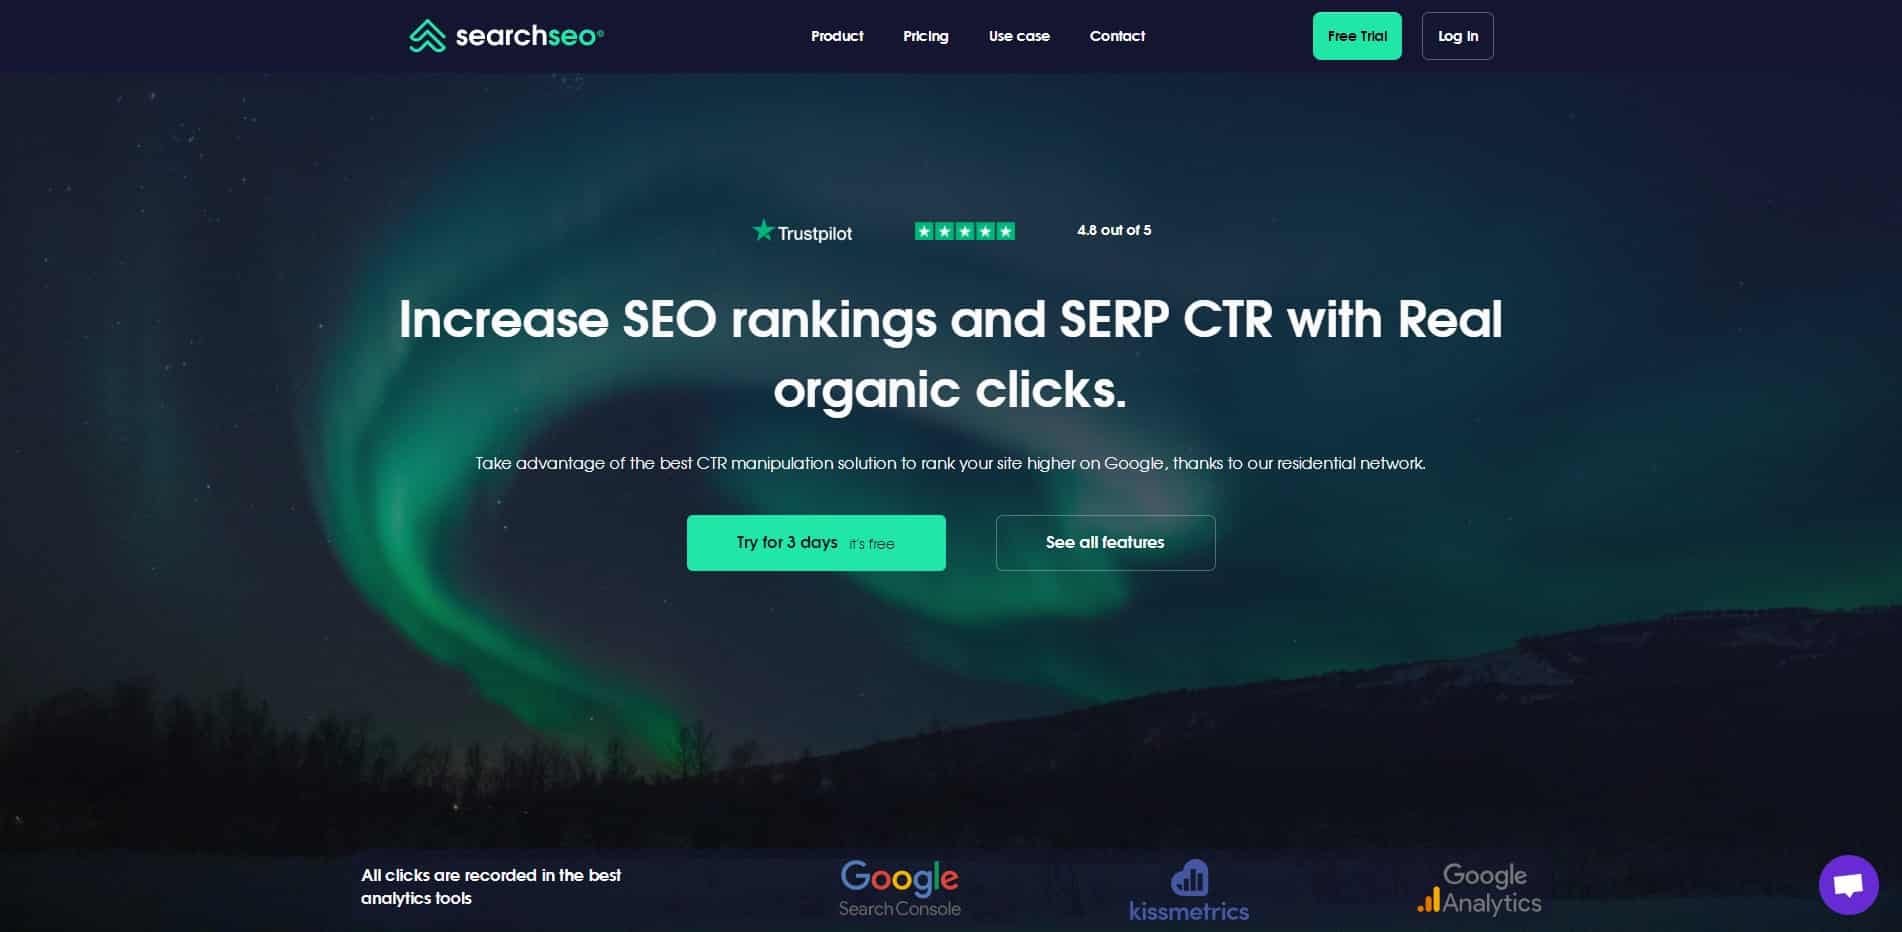 searchseo for ctr manipulation